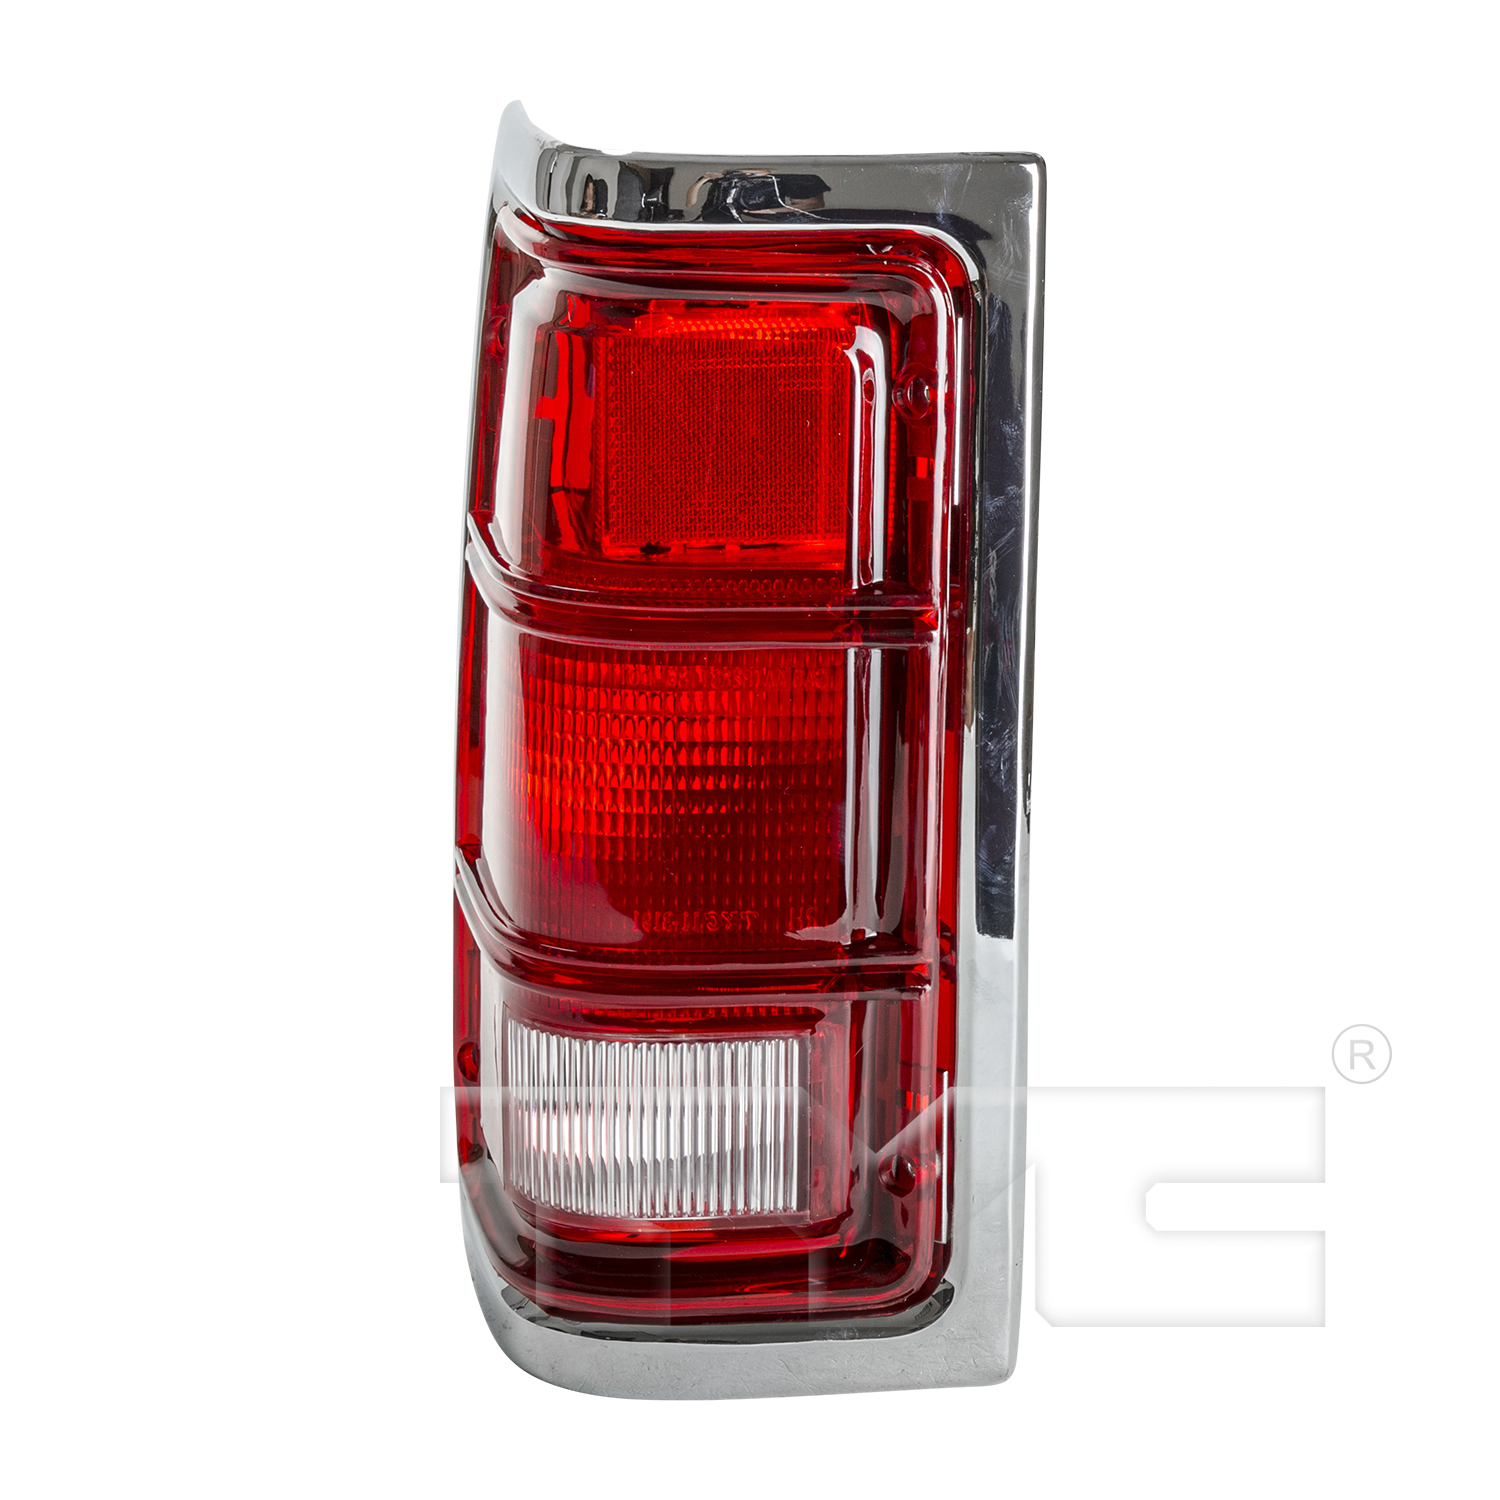 Aftermarket TAILLIGHTS for DODGE - W250, W250,92-93,LT Taillamp lens